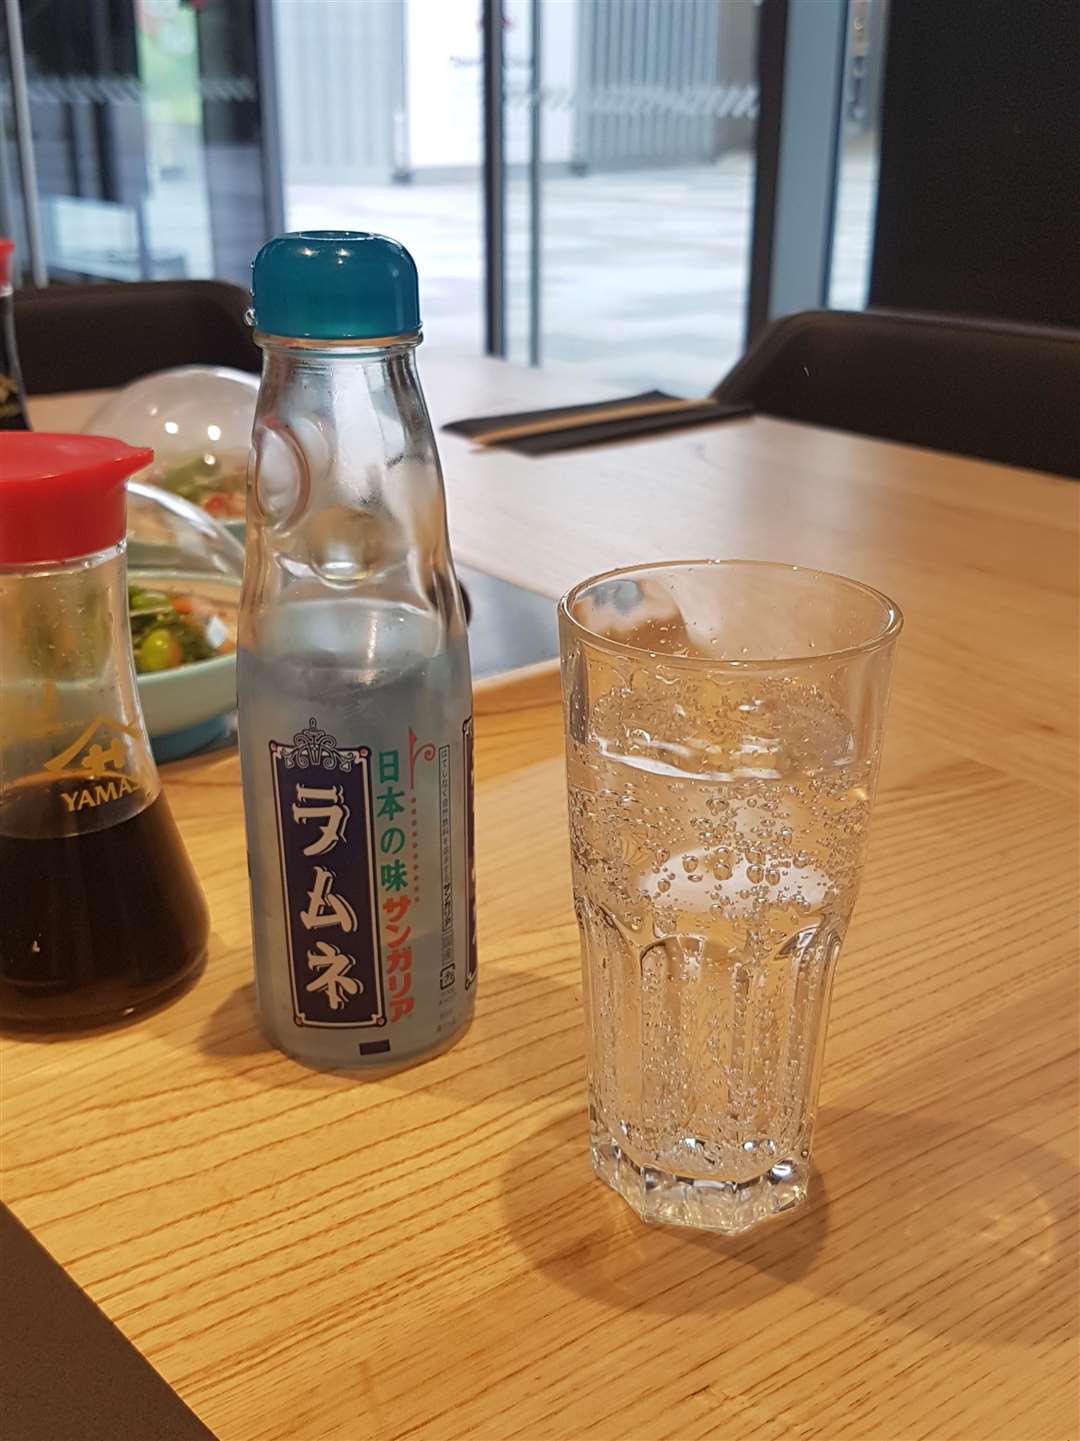 Japanese drinks are also available to try, with ramune soda being a favourite of mine. (10794648)